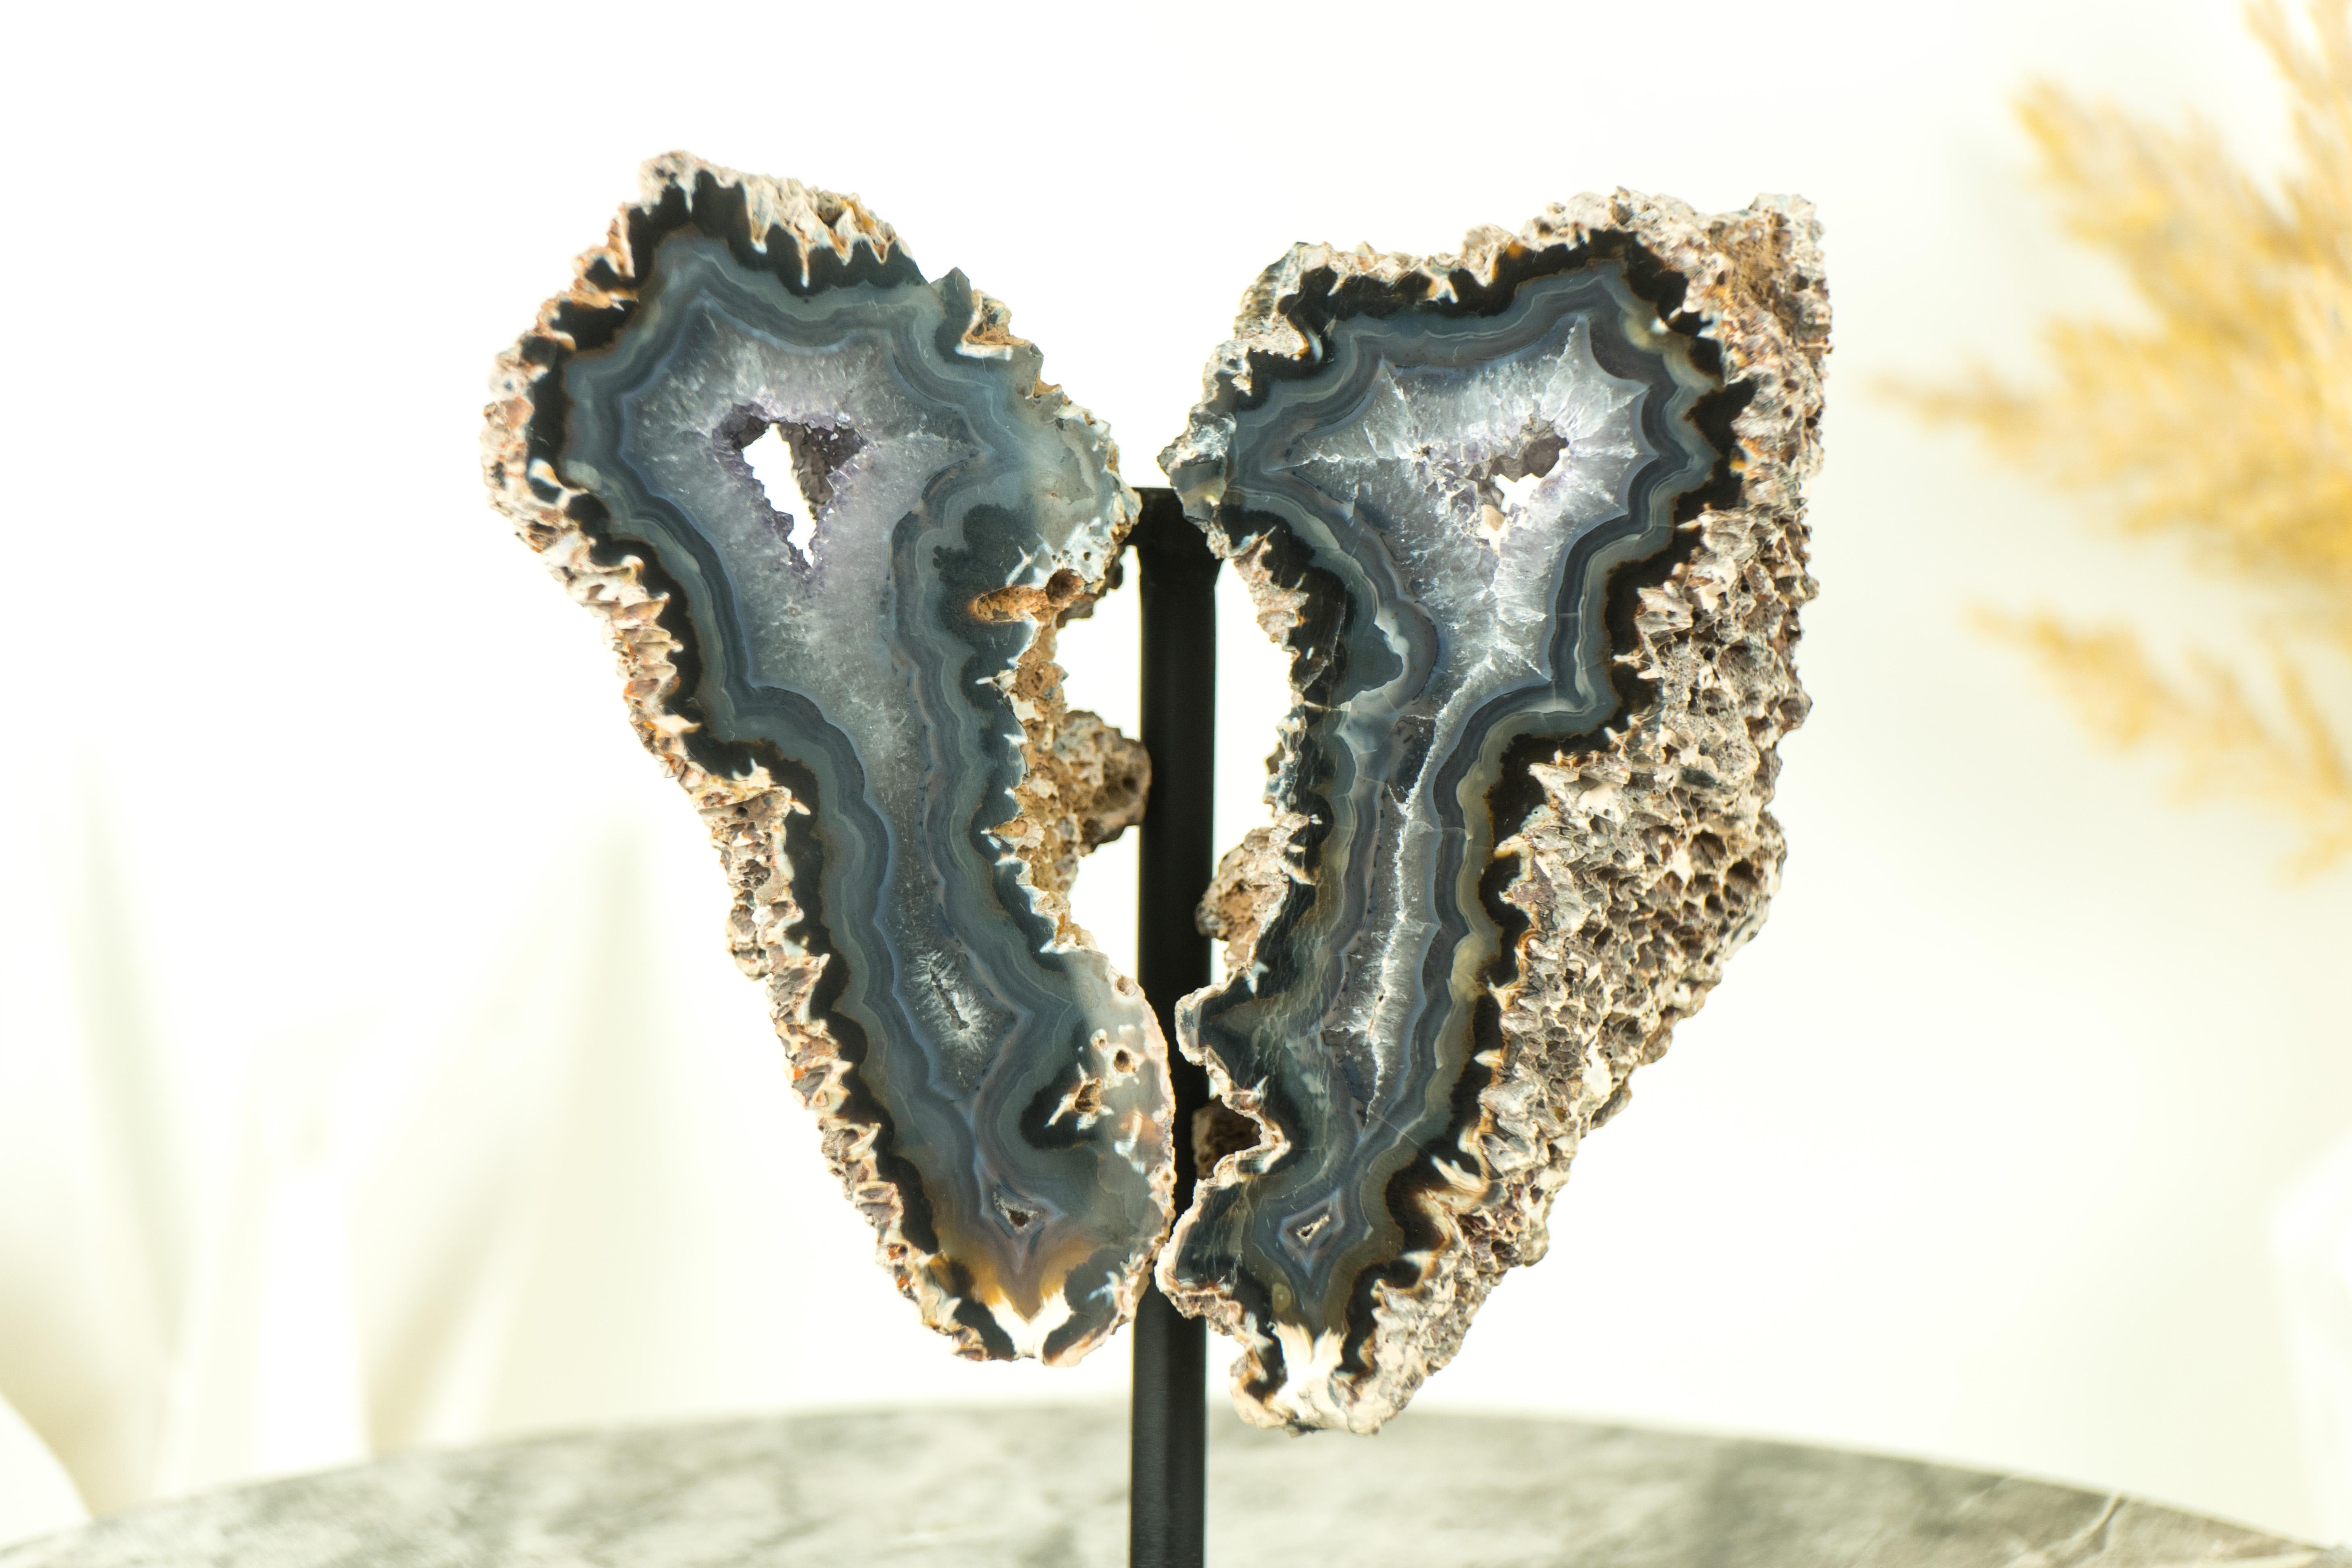 Amethyst Small Spiky Lace Agate Geode with Druzy, in Butterfly Wings Format, Intact For Sale